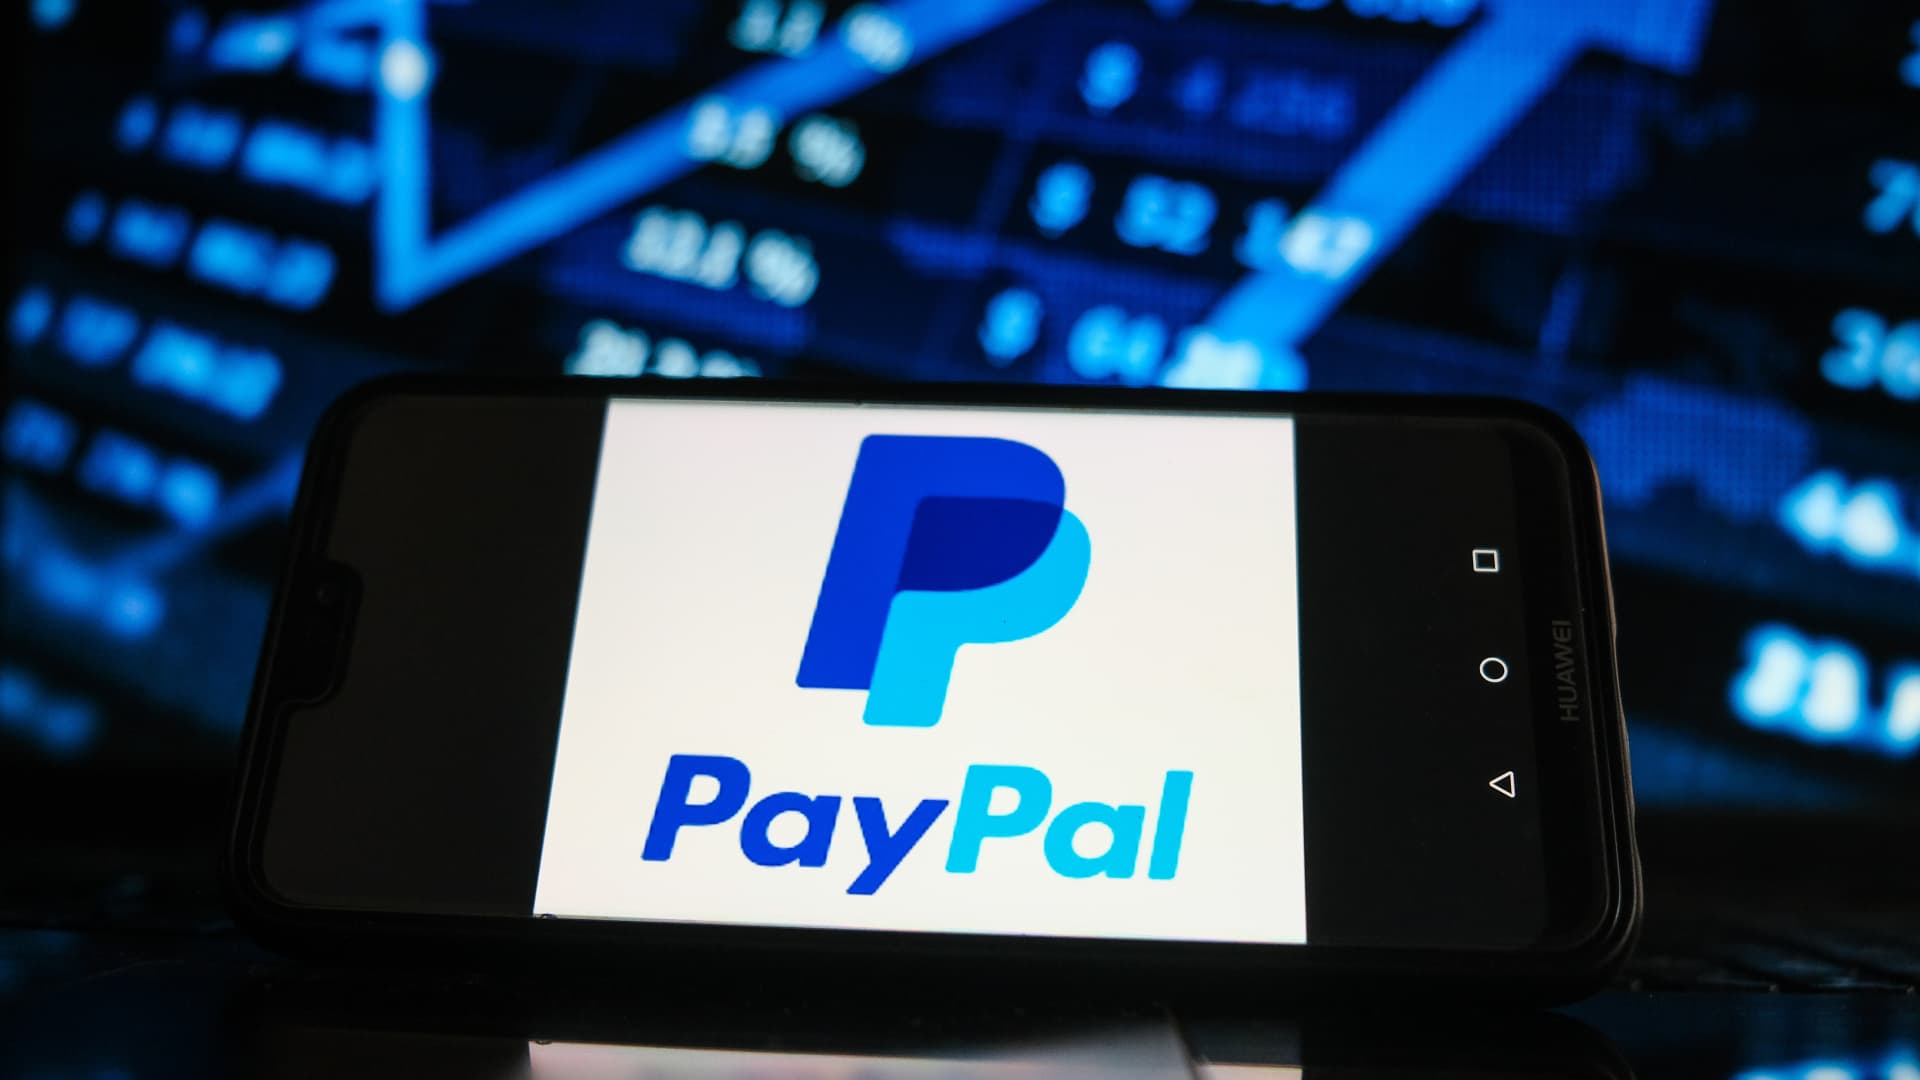 Susquehanna downgrades PayPal to neutral, citing growing margin pressure at Braintree subsidiary